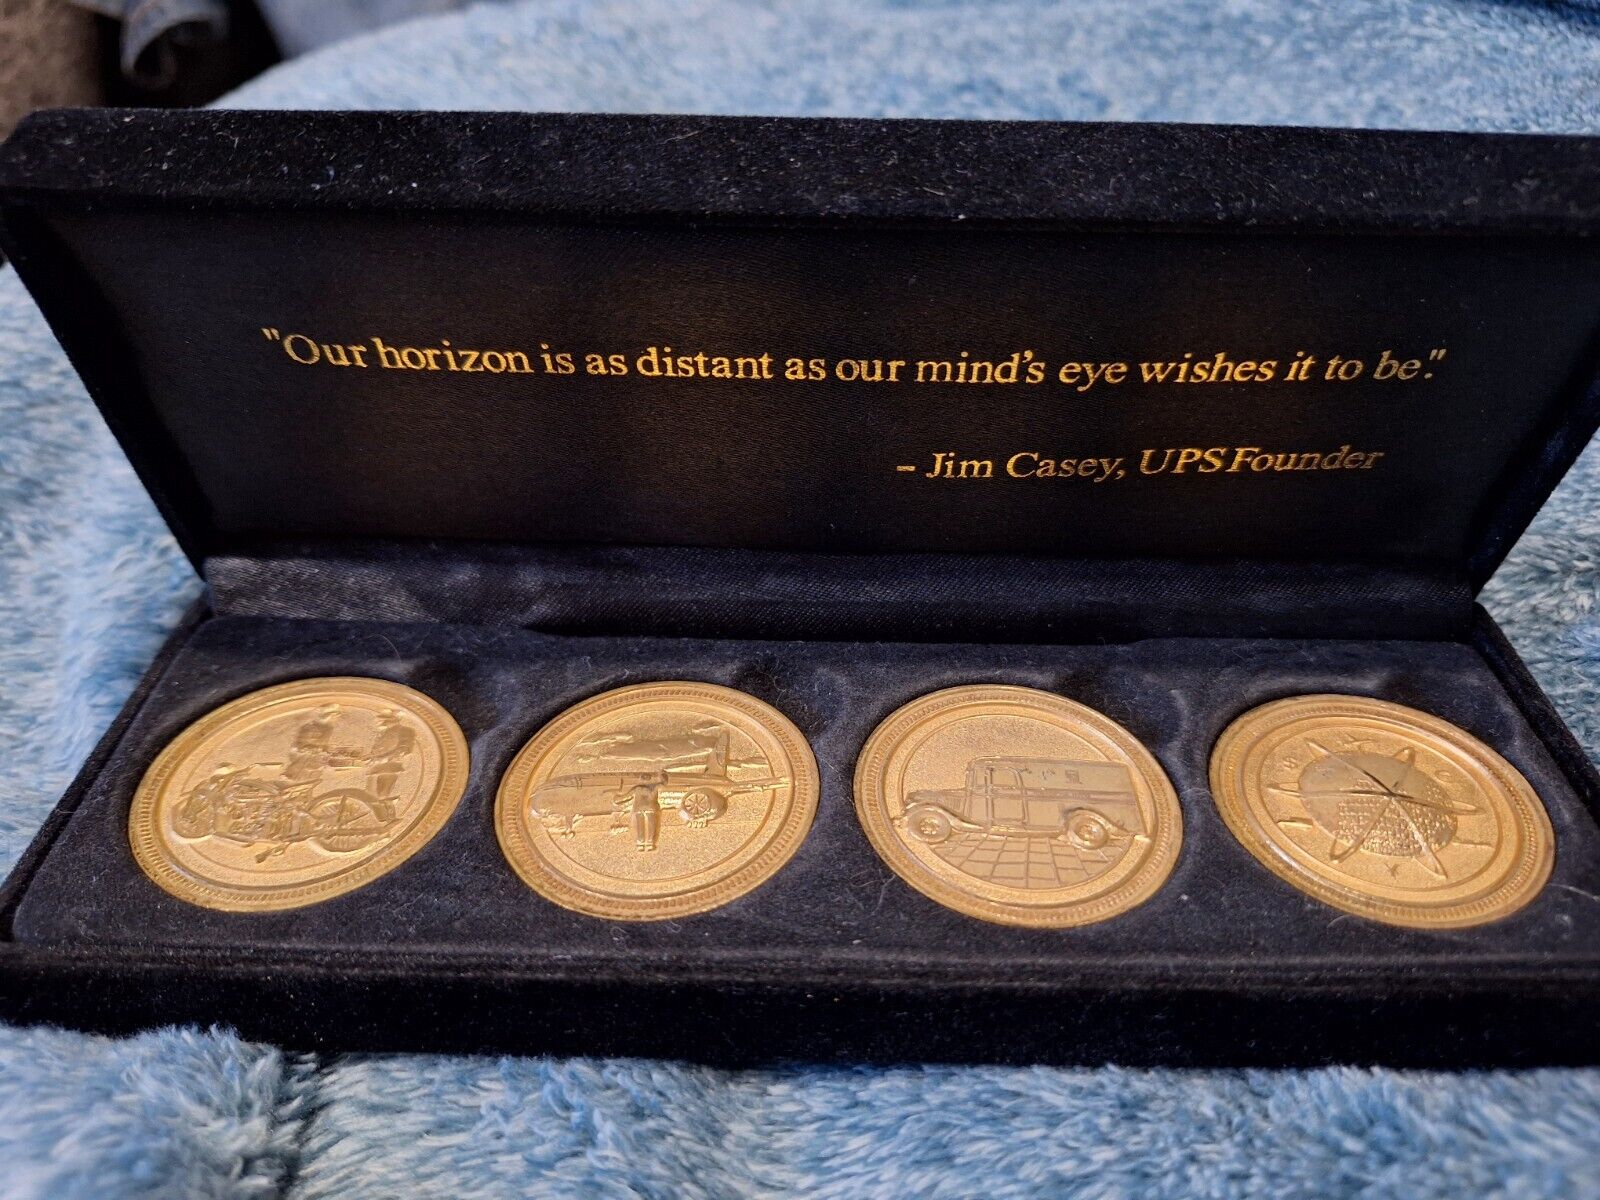 United Parcel Service  UPS Four Golden Medals Rare All UPS Logos Coins